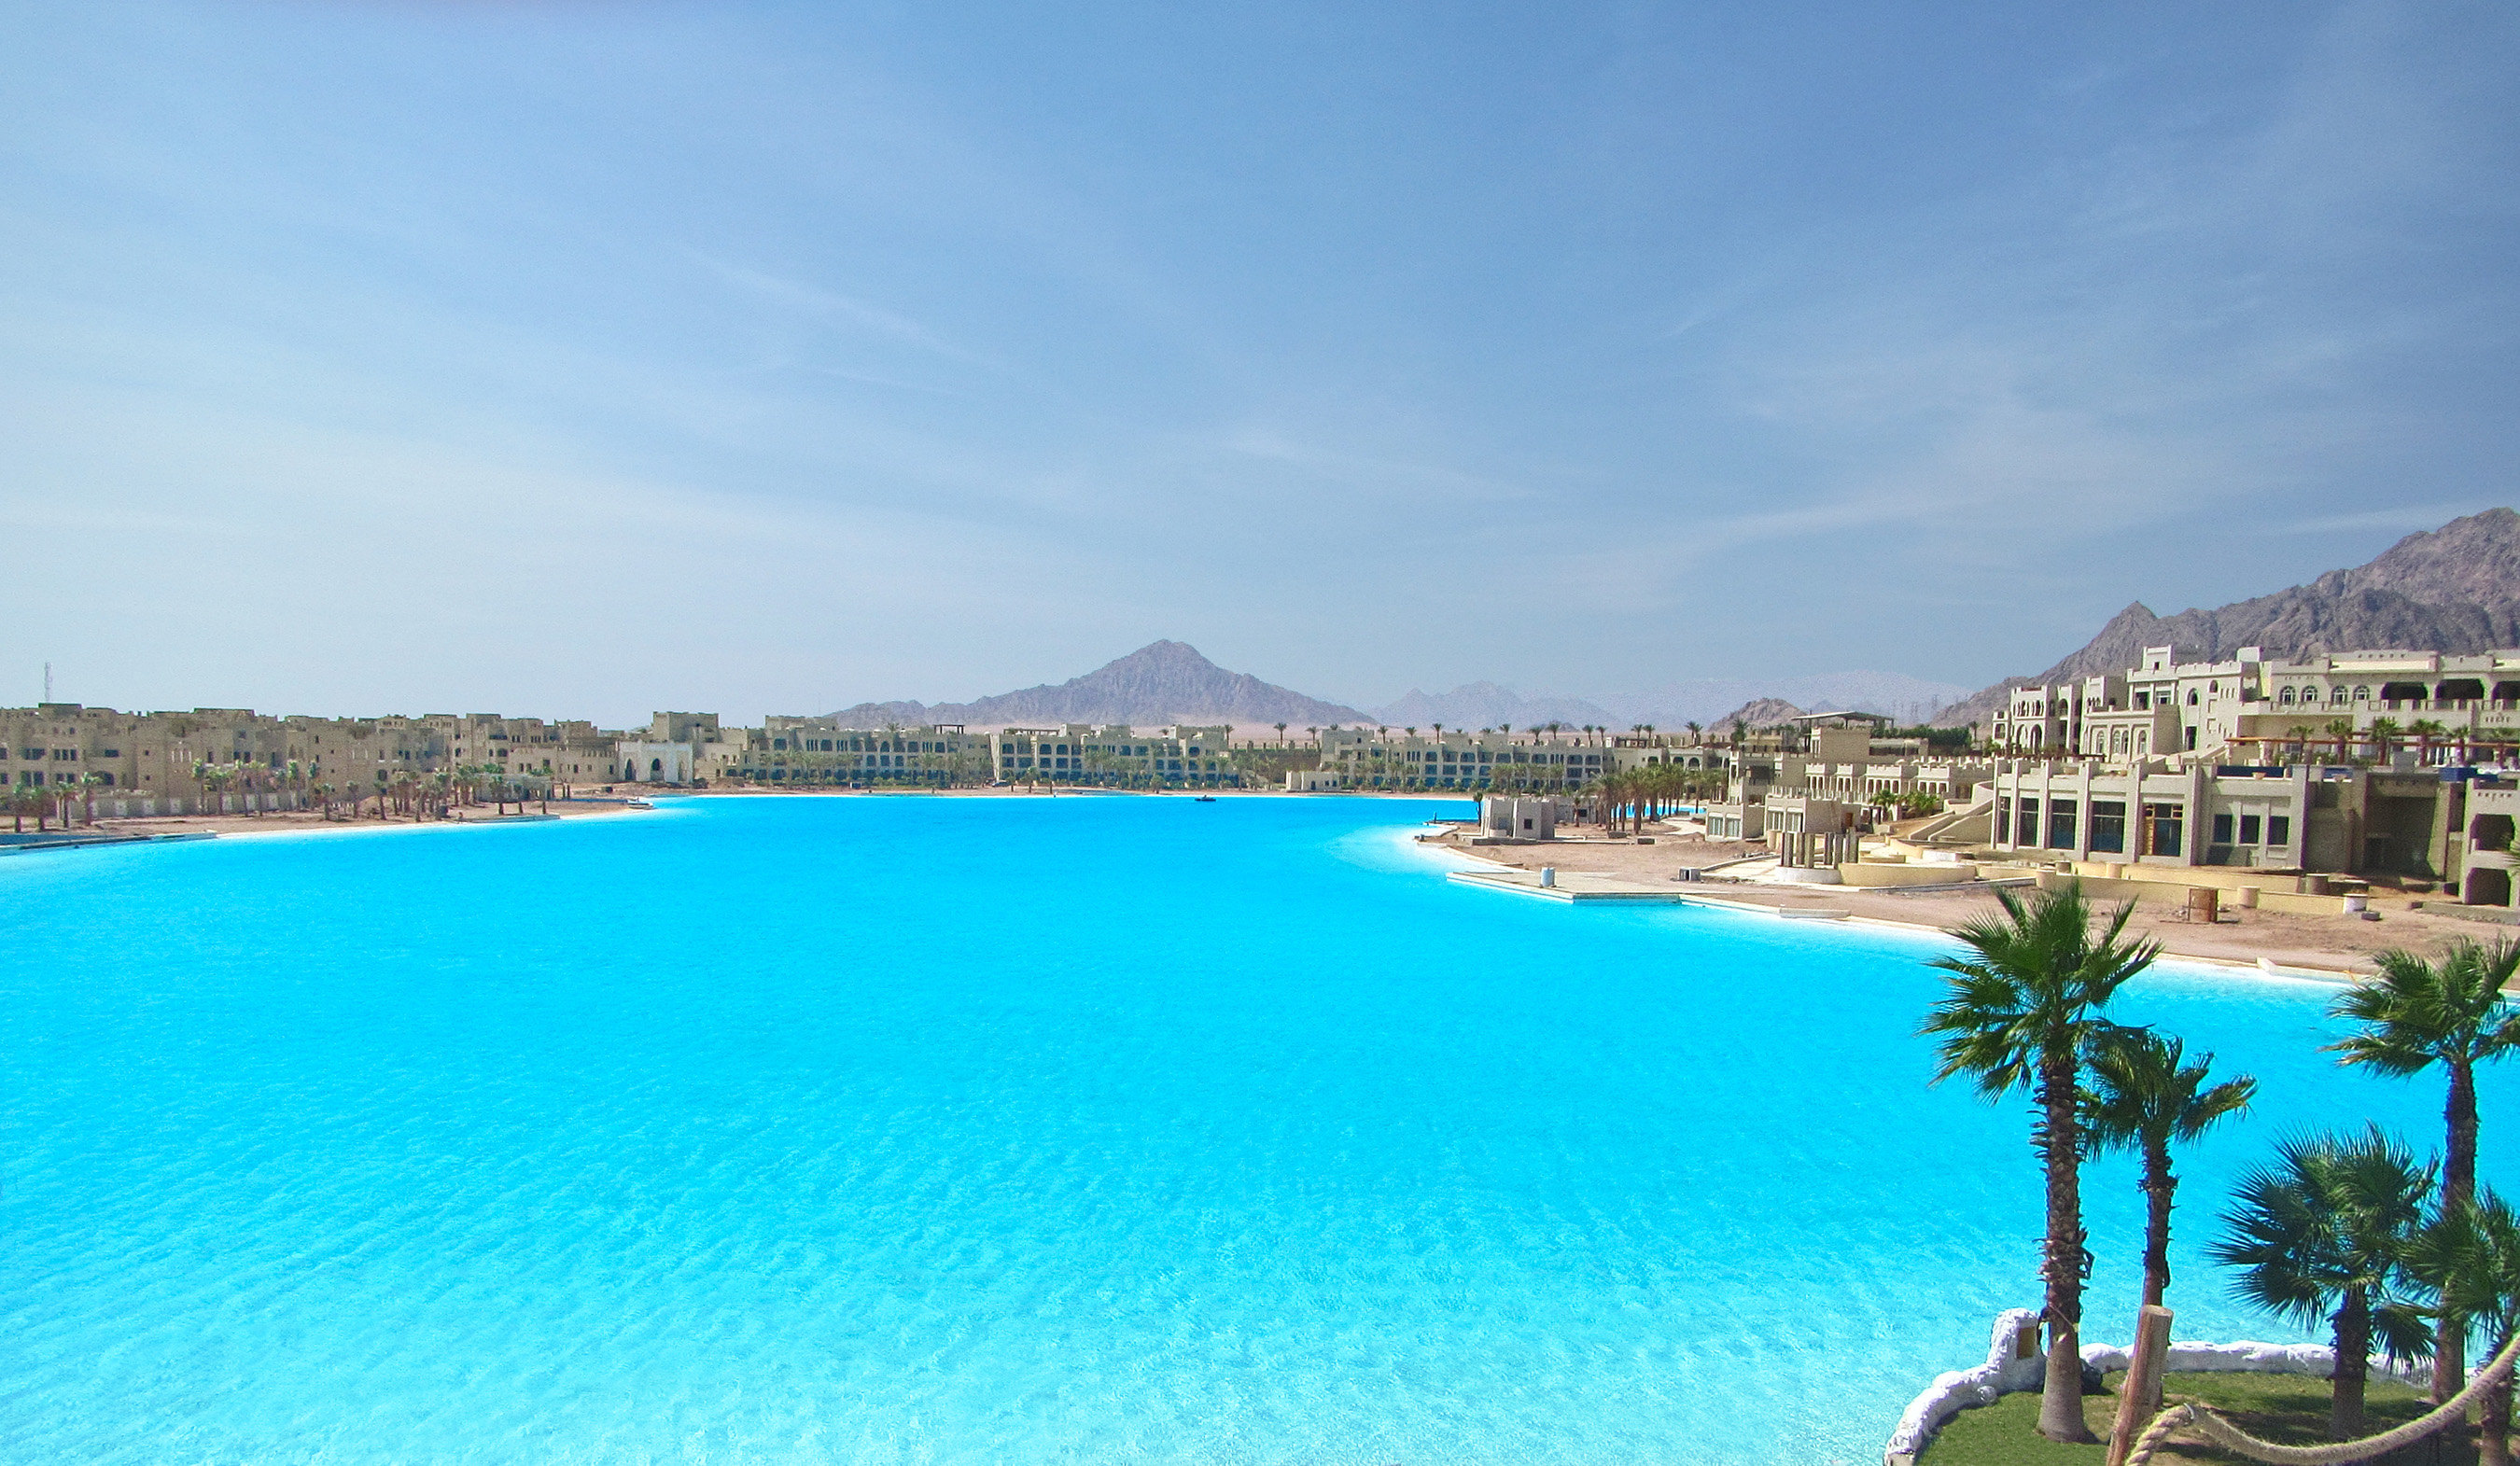 The 30-acre Crystal Lagoon is the main attraction of Citystars Sharm El Sheikh, a popular tourist resort in one of Egypt’s most luxurious coastal towns.